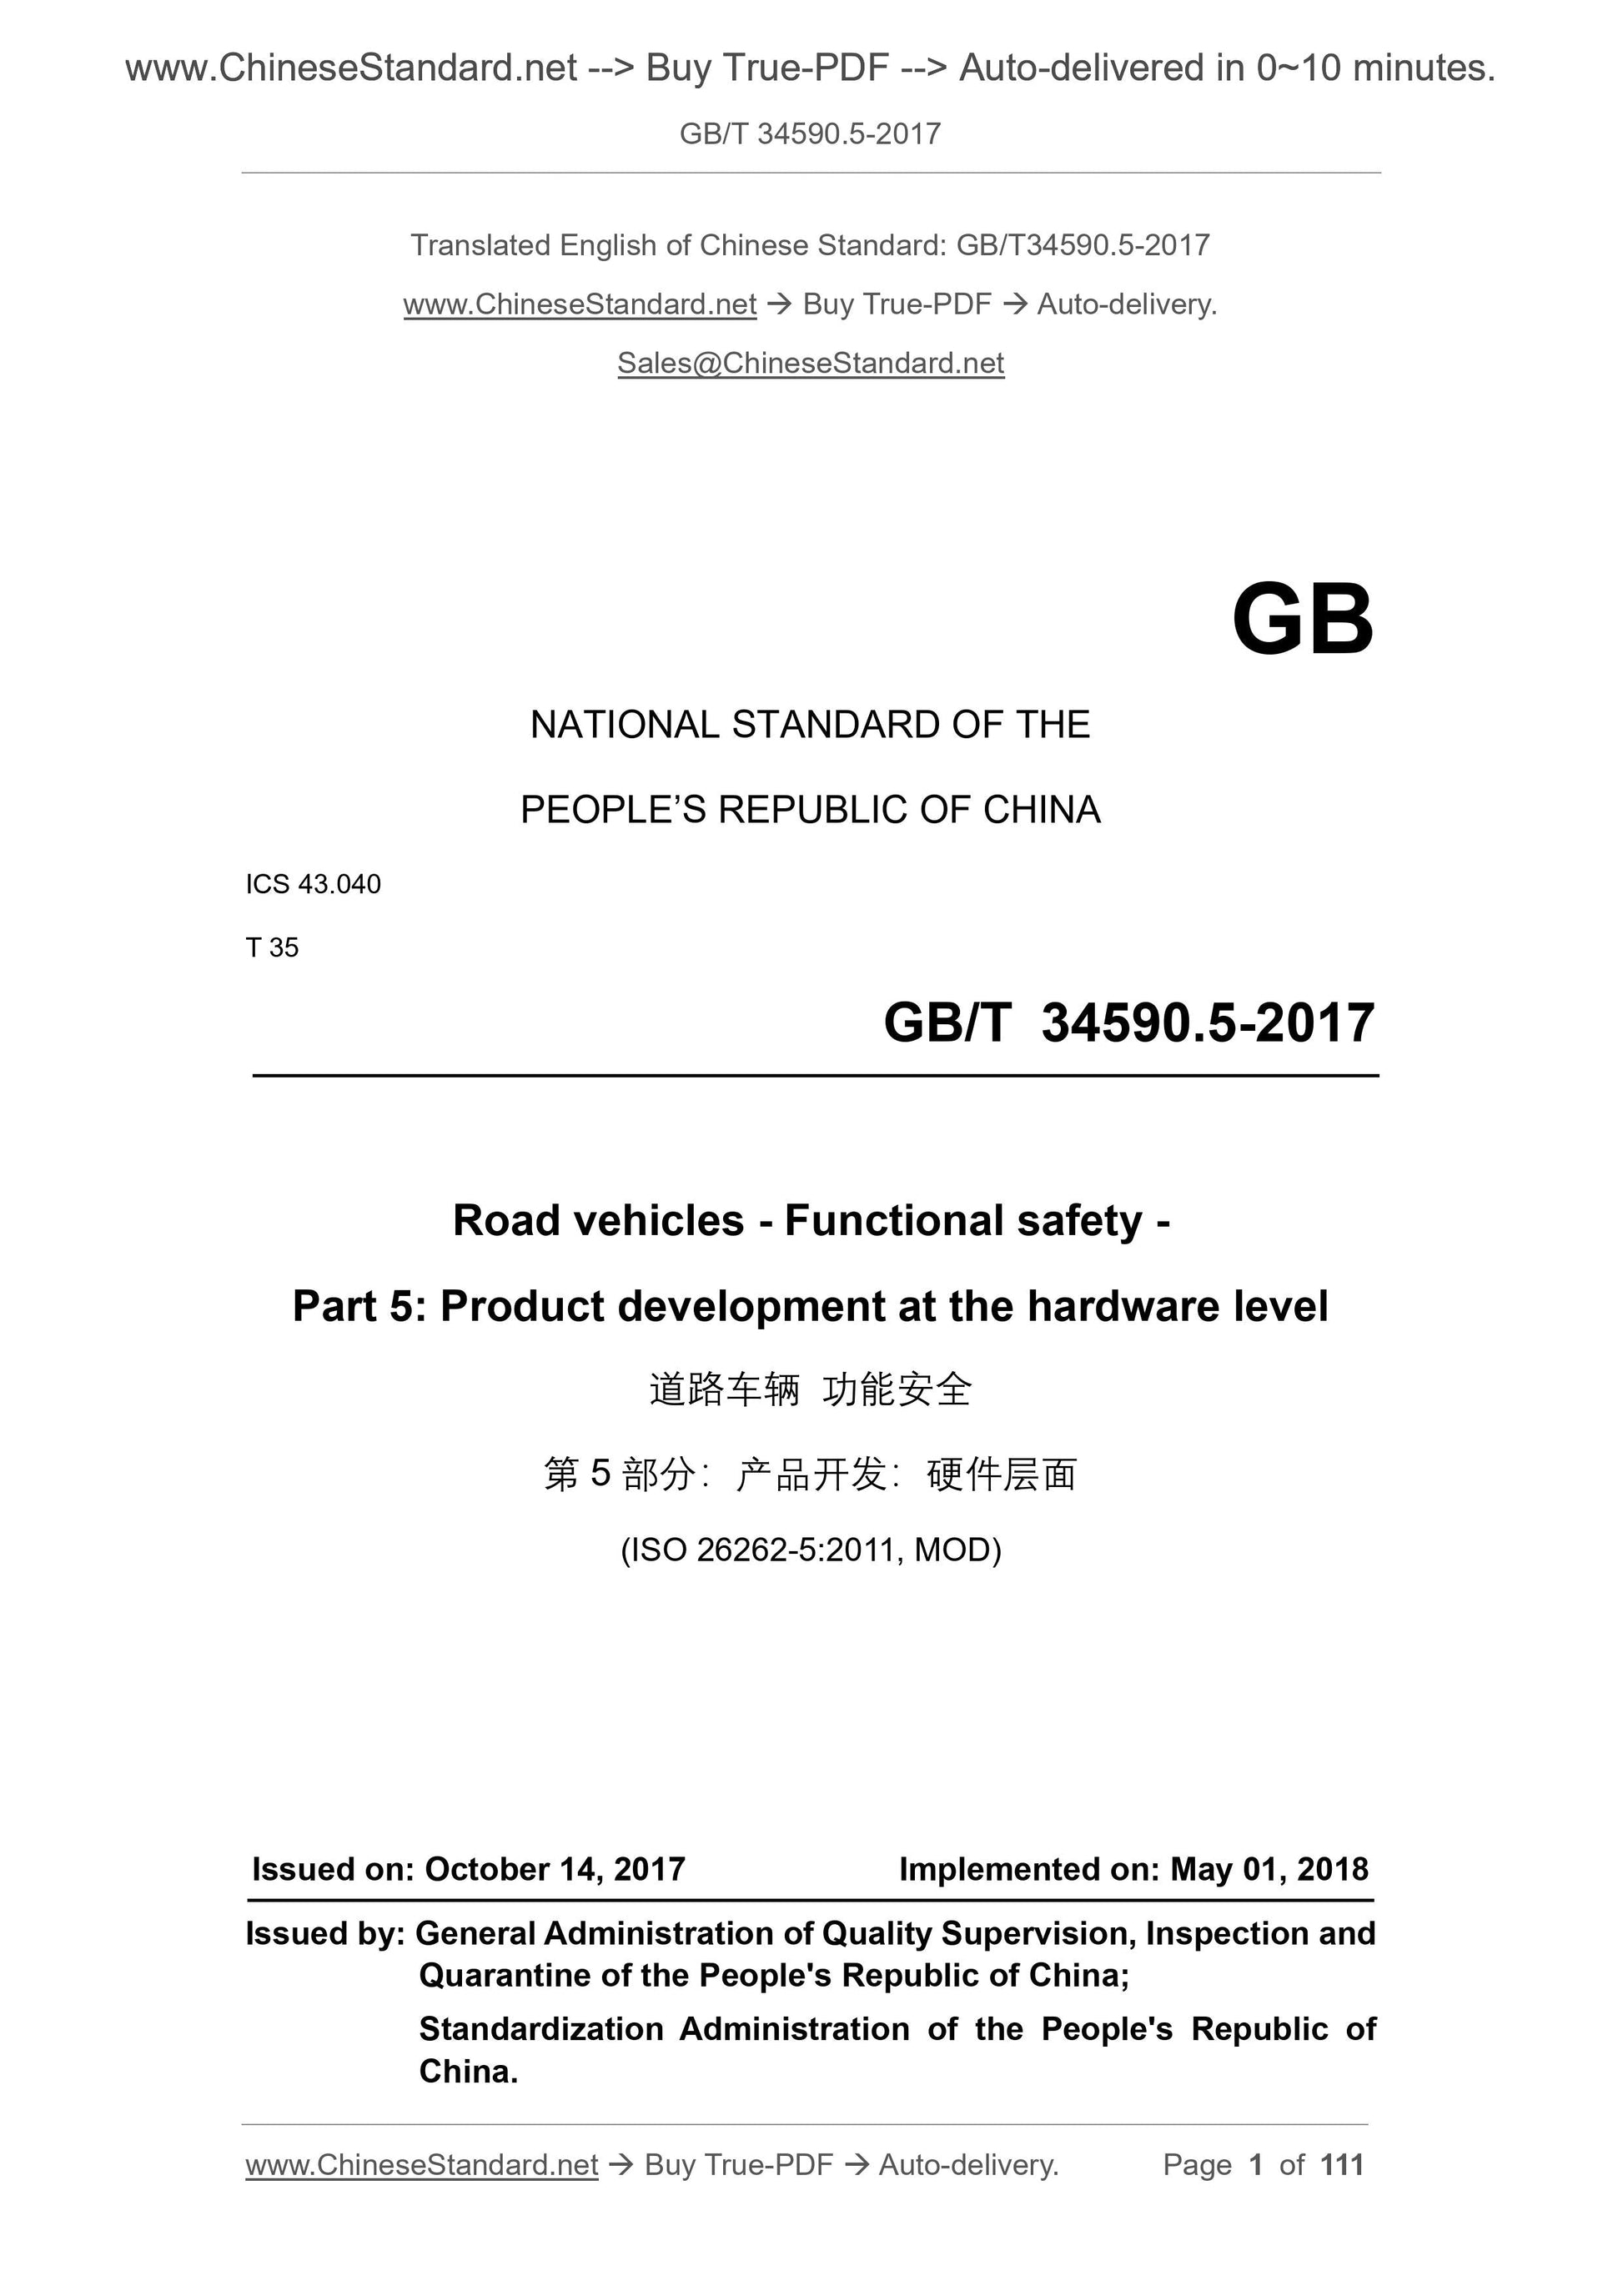 GB/T 34590.5-2017 Page 1